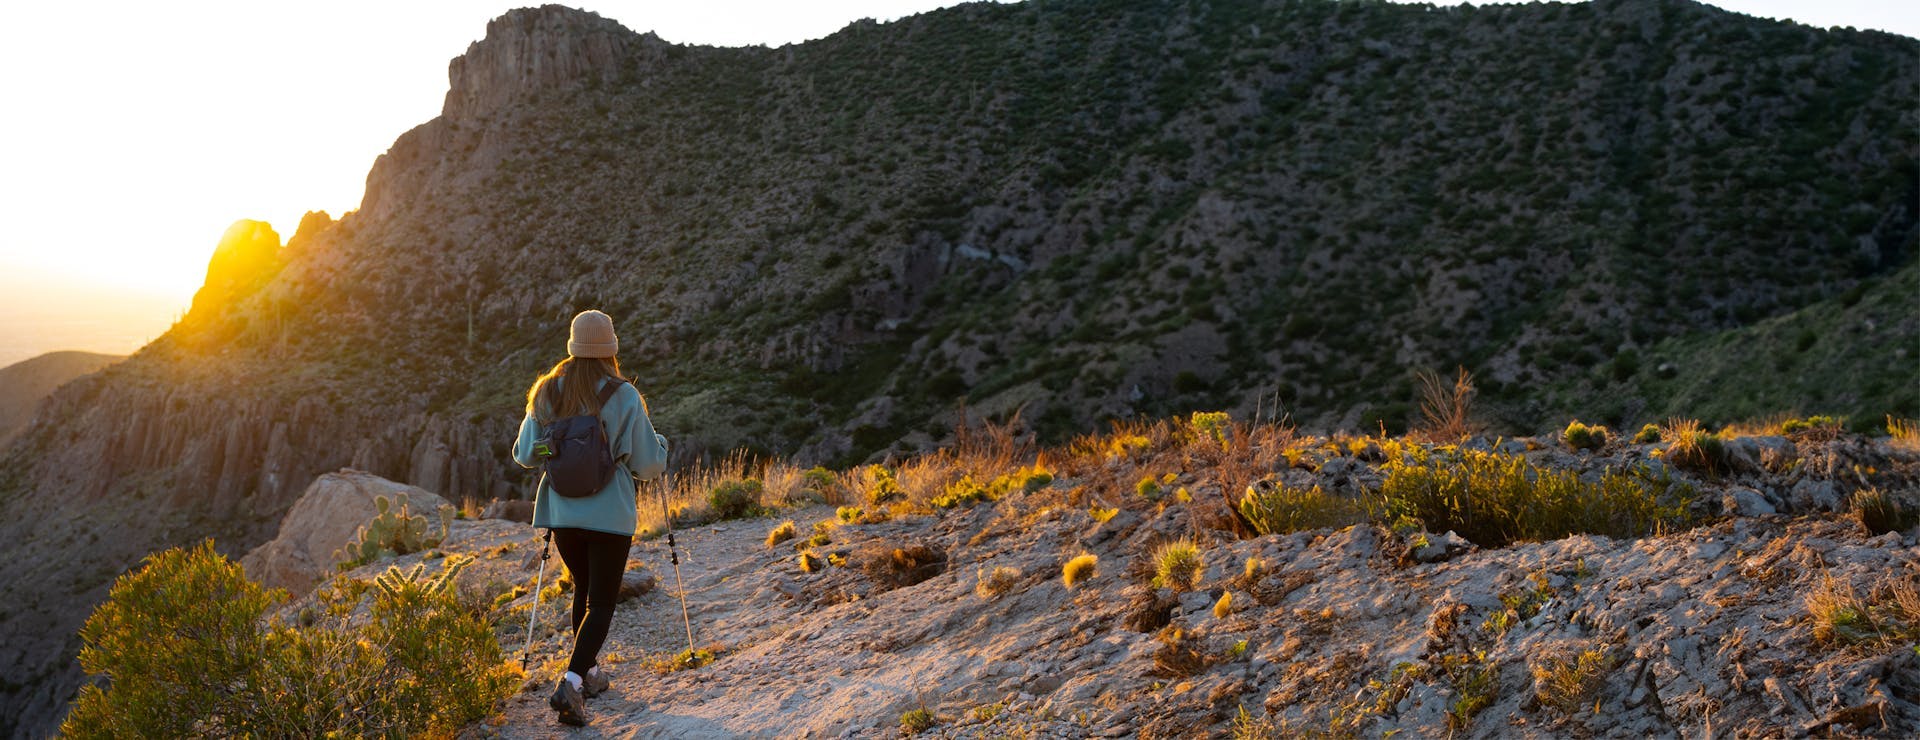 Woman hiking in mountains at sunset